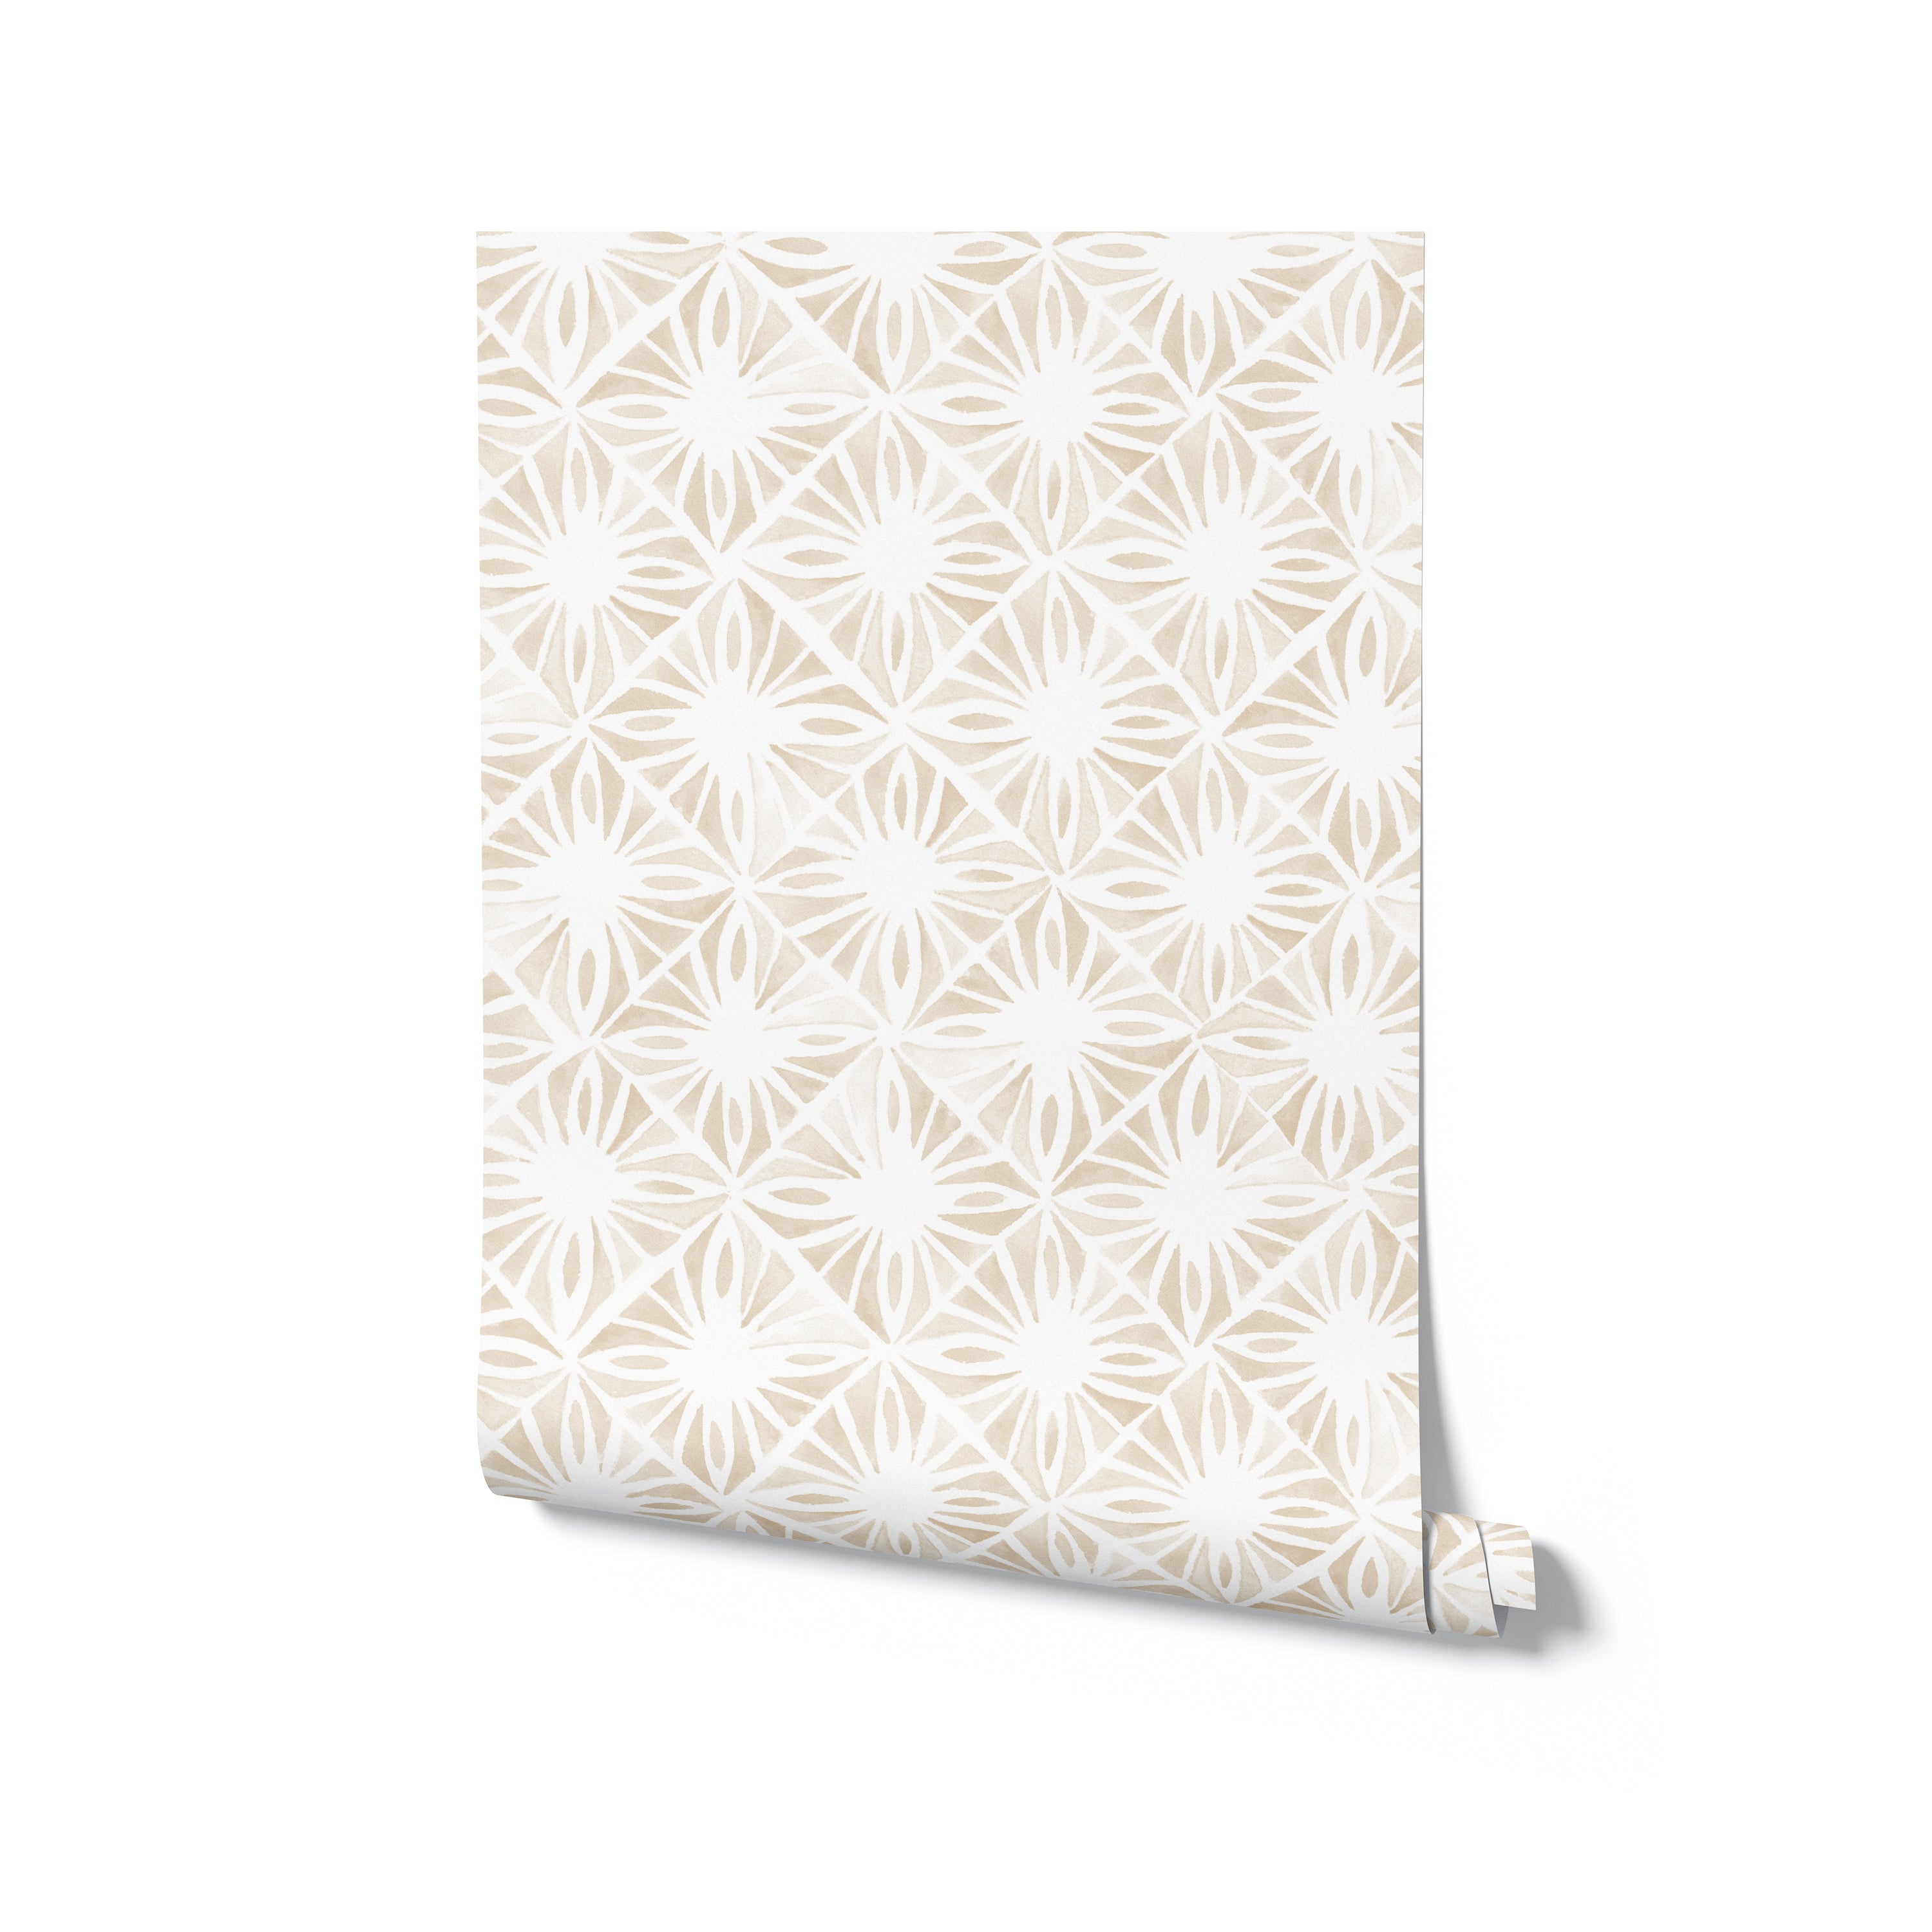 A roll of Moroccan Tile II Wallpaper unfurled slightly to reveal a detailed white and almond geometric pattern, reminiscent of classic Moroccan design, perfect for adding a sophisticated global touch to any interior space.